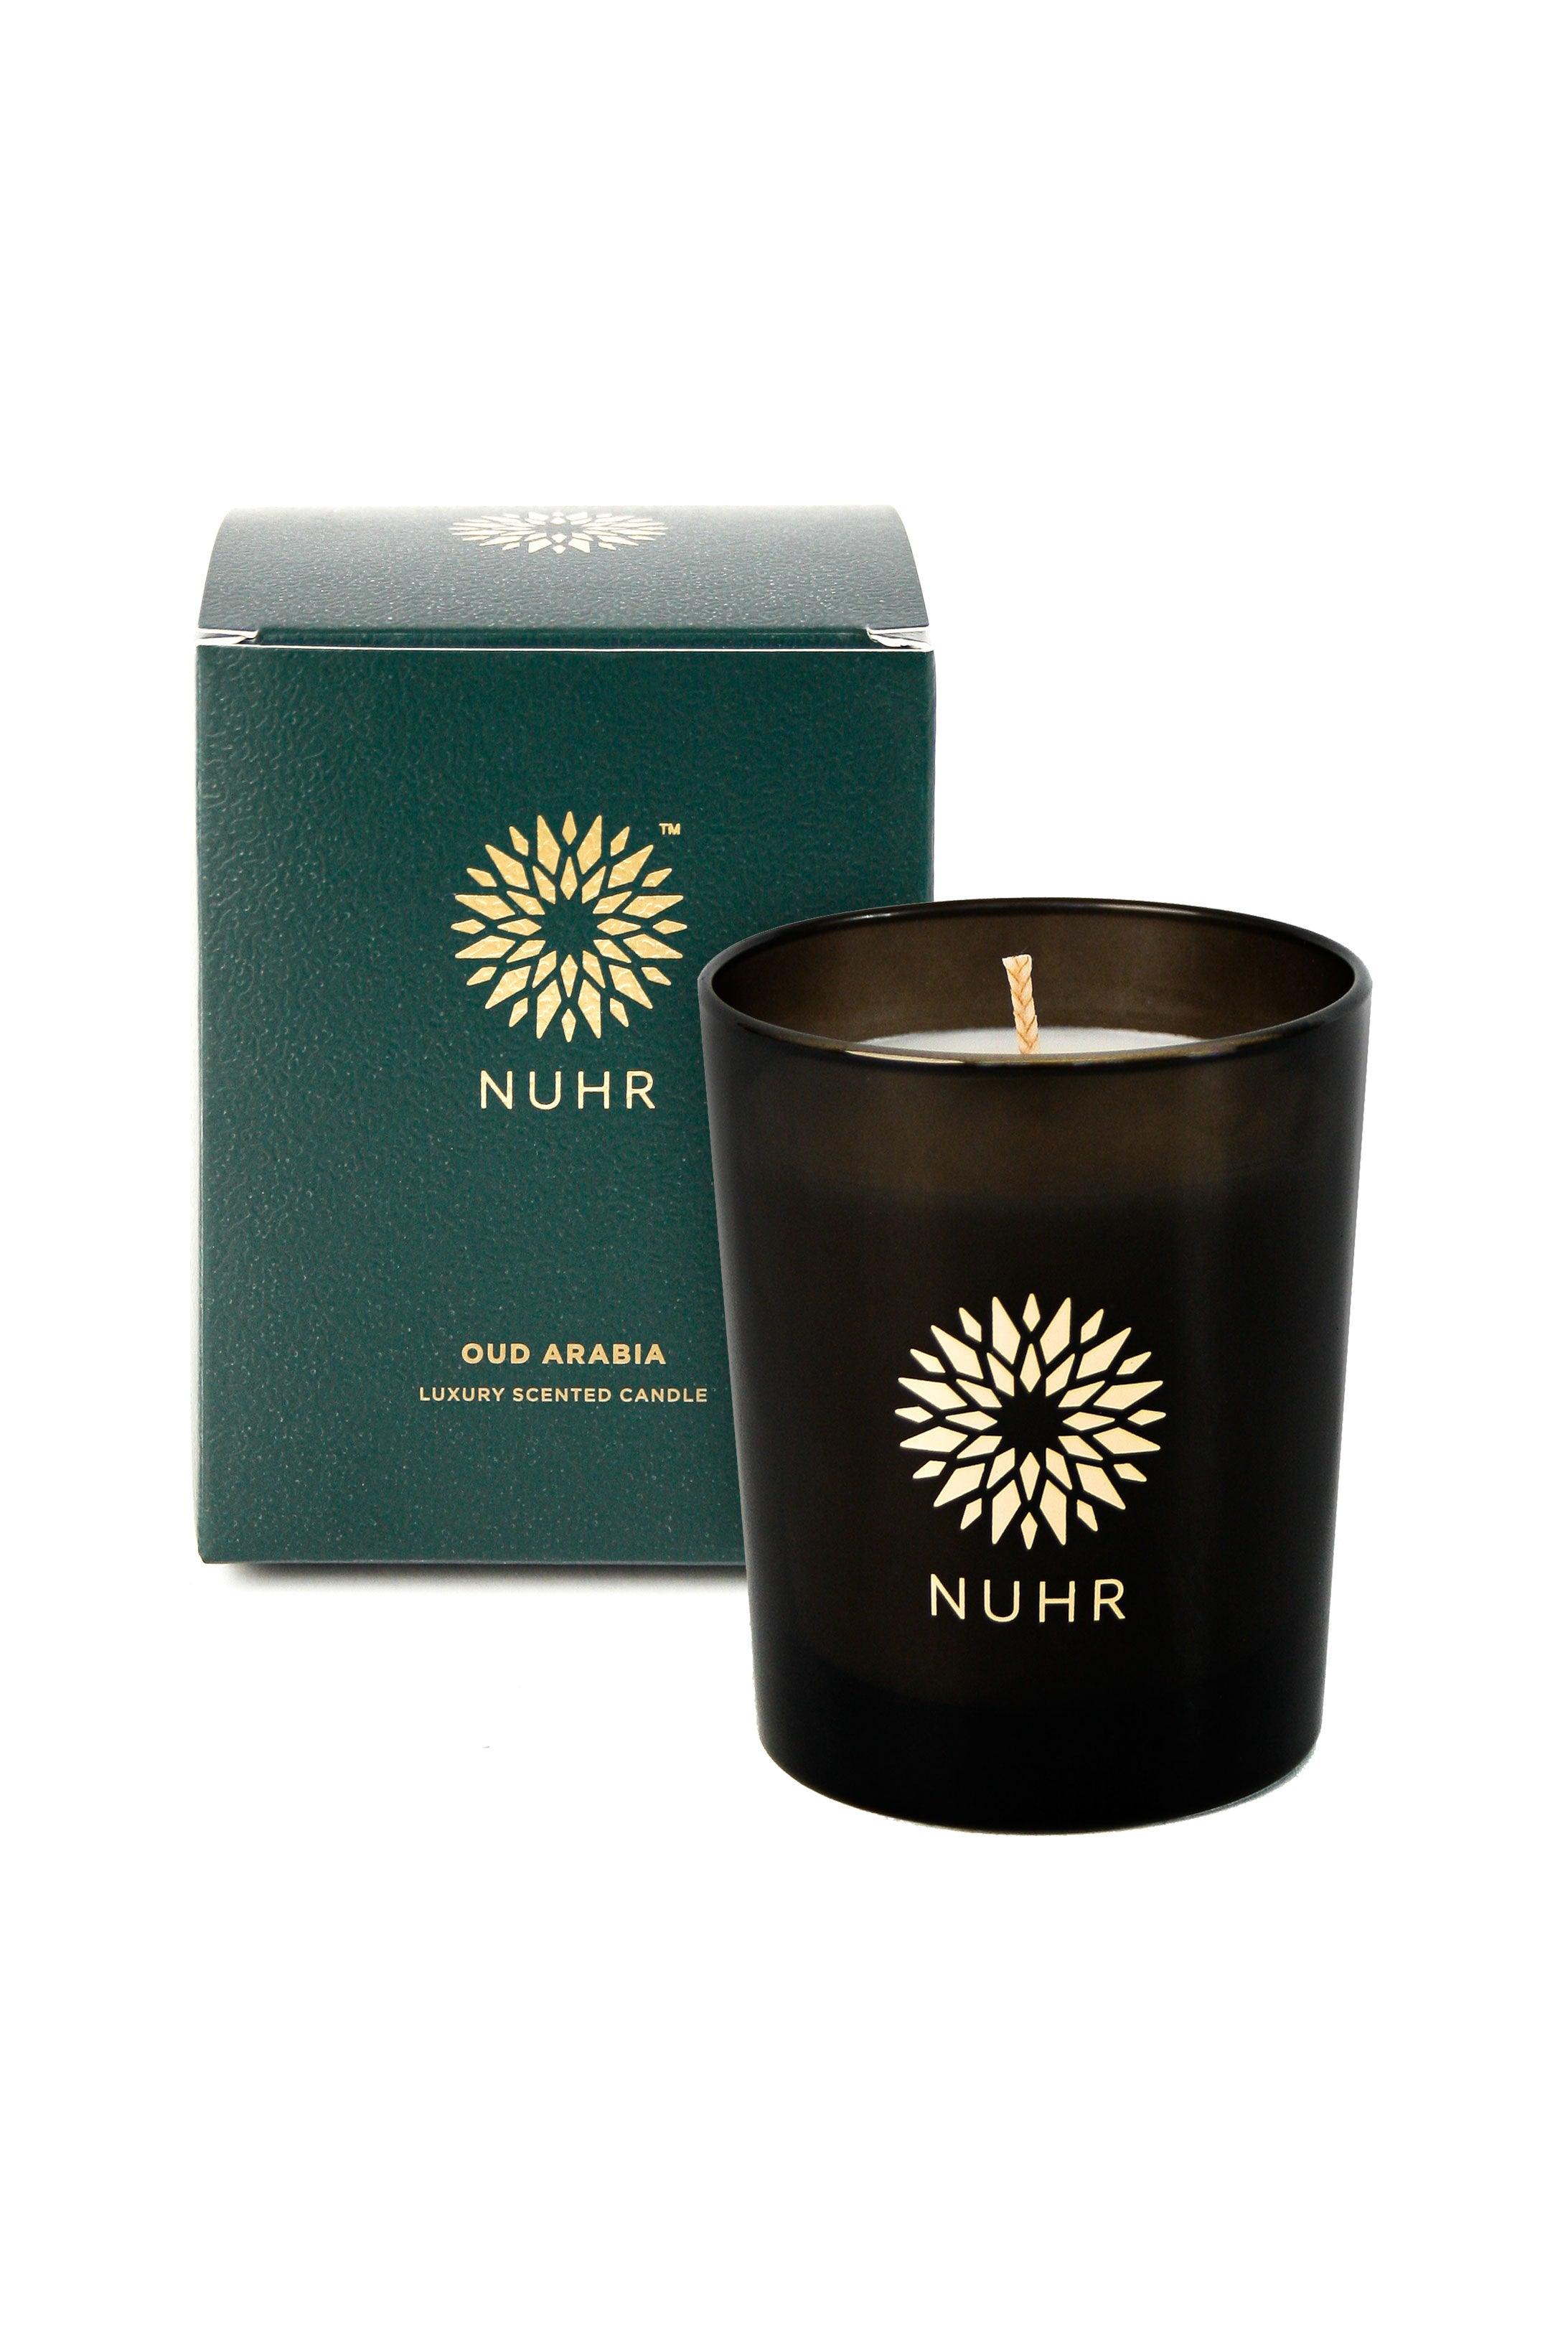 Oud Arabia Luxury Scented Candle - Islamic Pixels